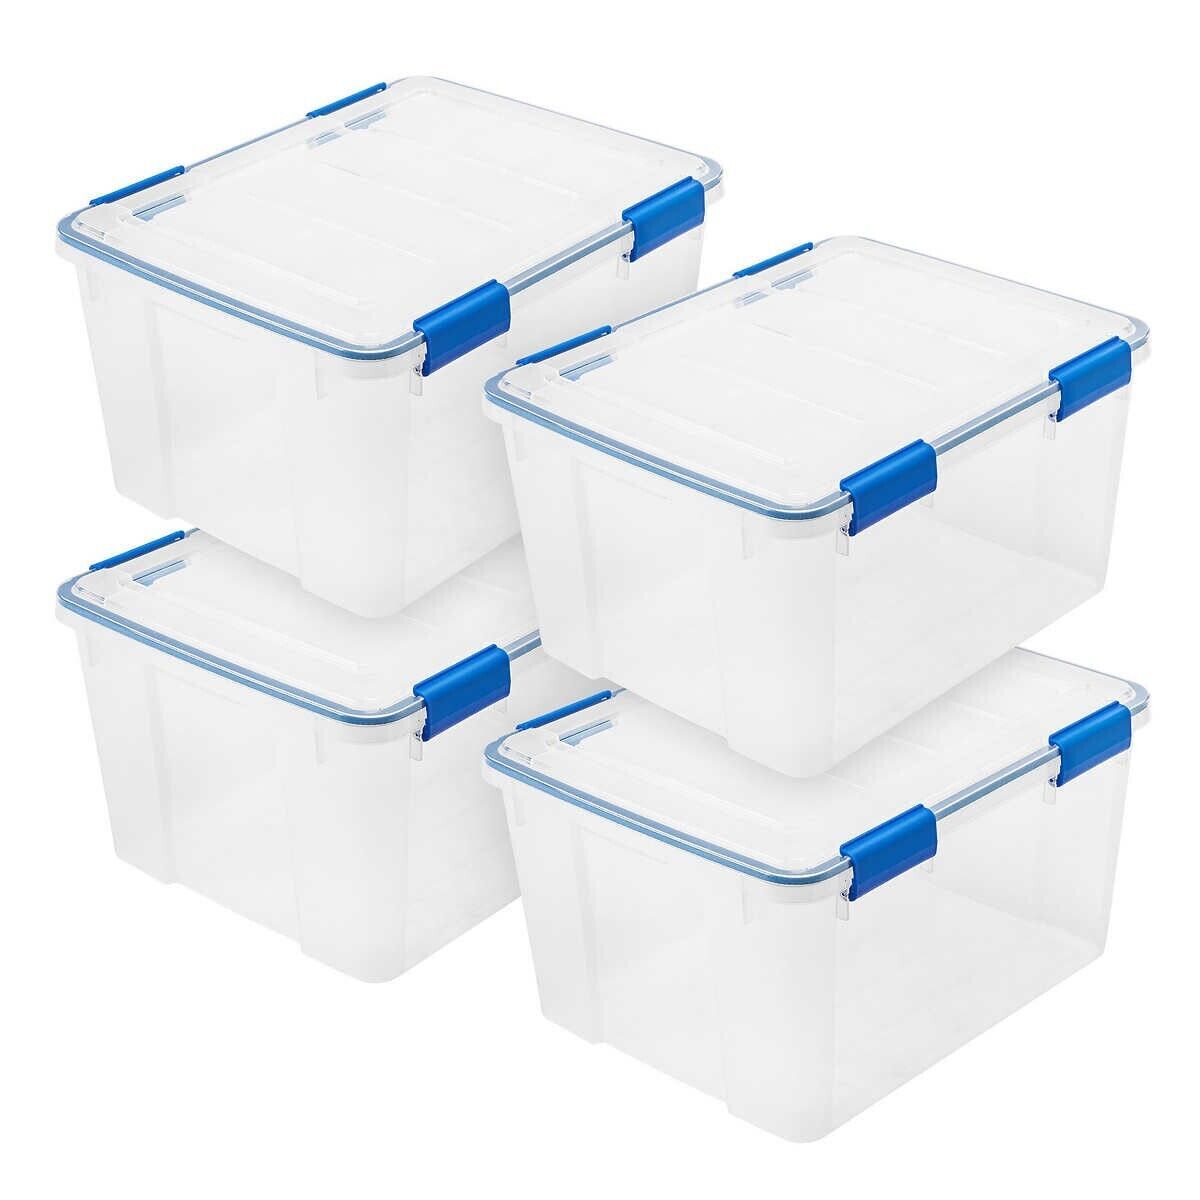 Primary image for IRIS STORAGE CONTAINERS BINS TUBS BOX WEATHERTIGHT AIRTIGHT PET FOOD 44 QT  4 PK